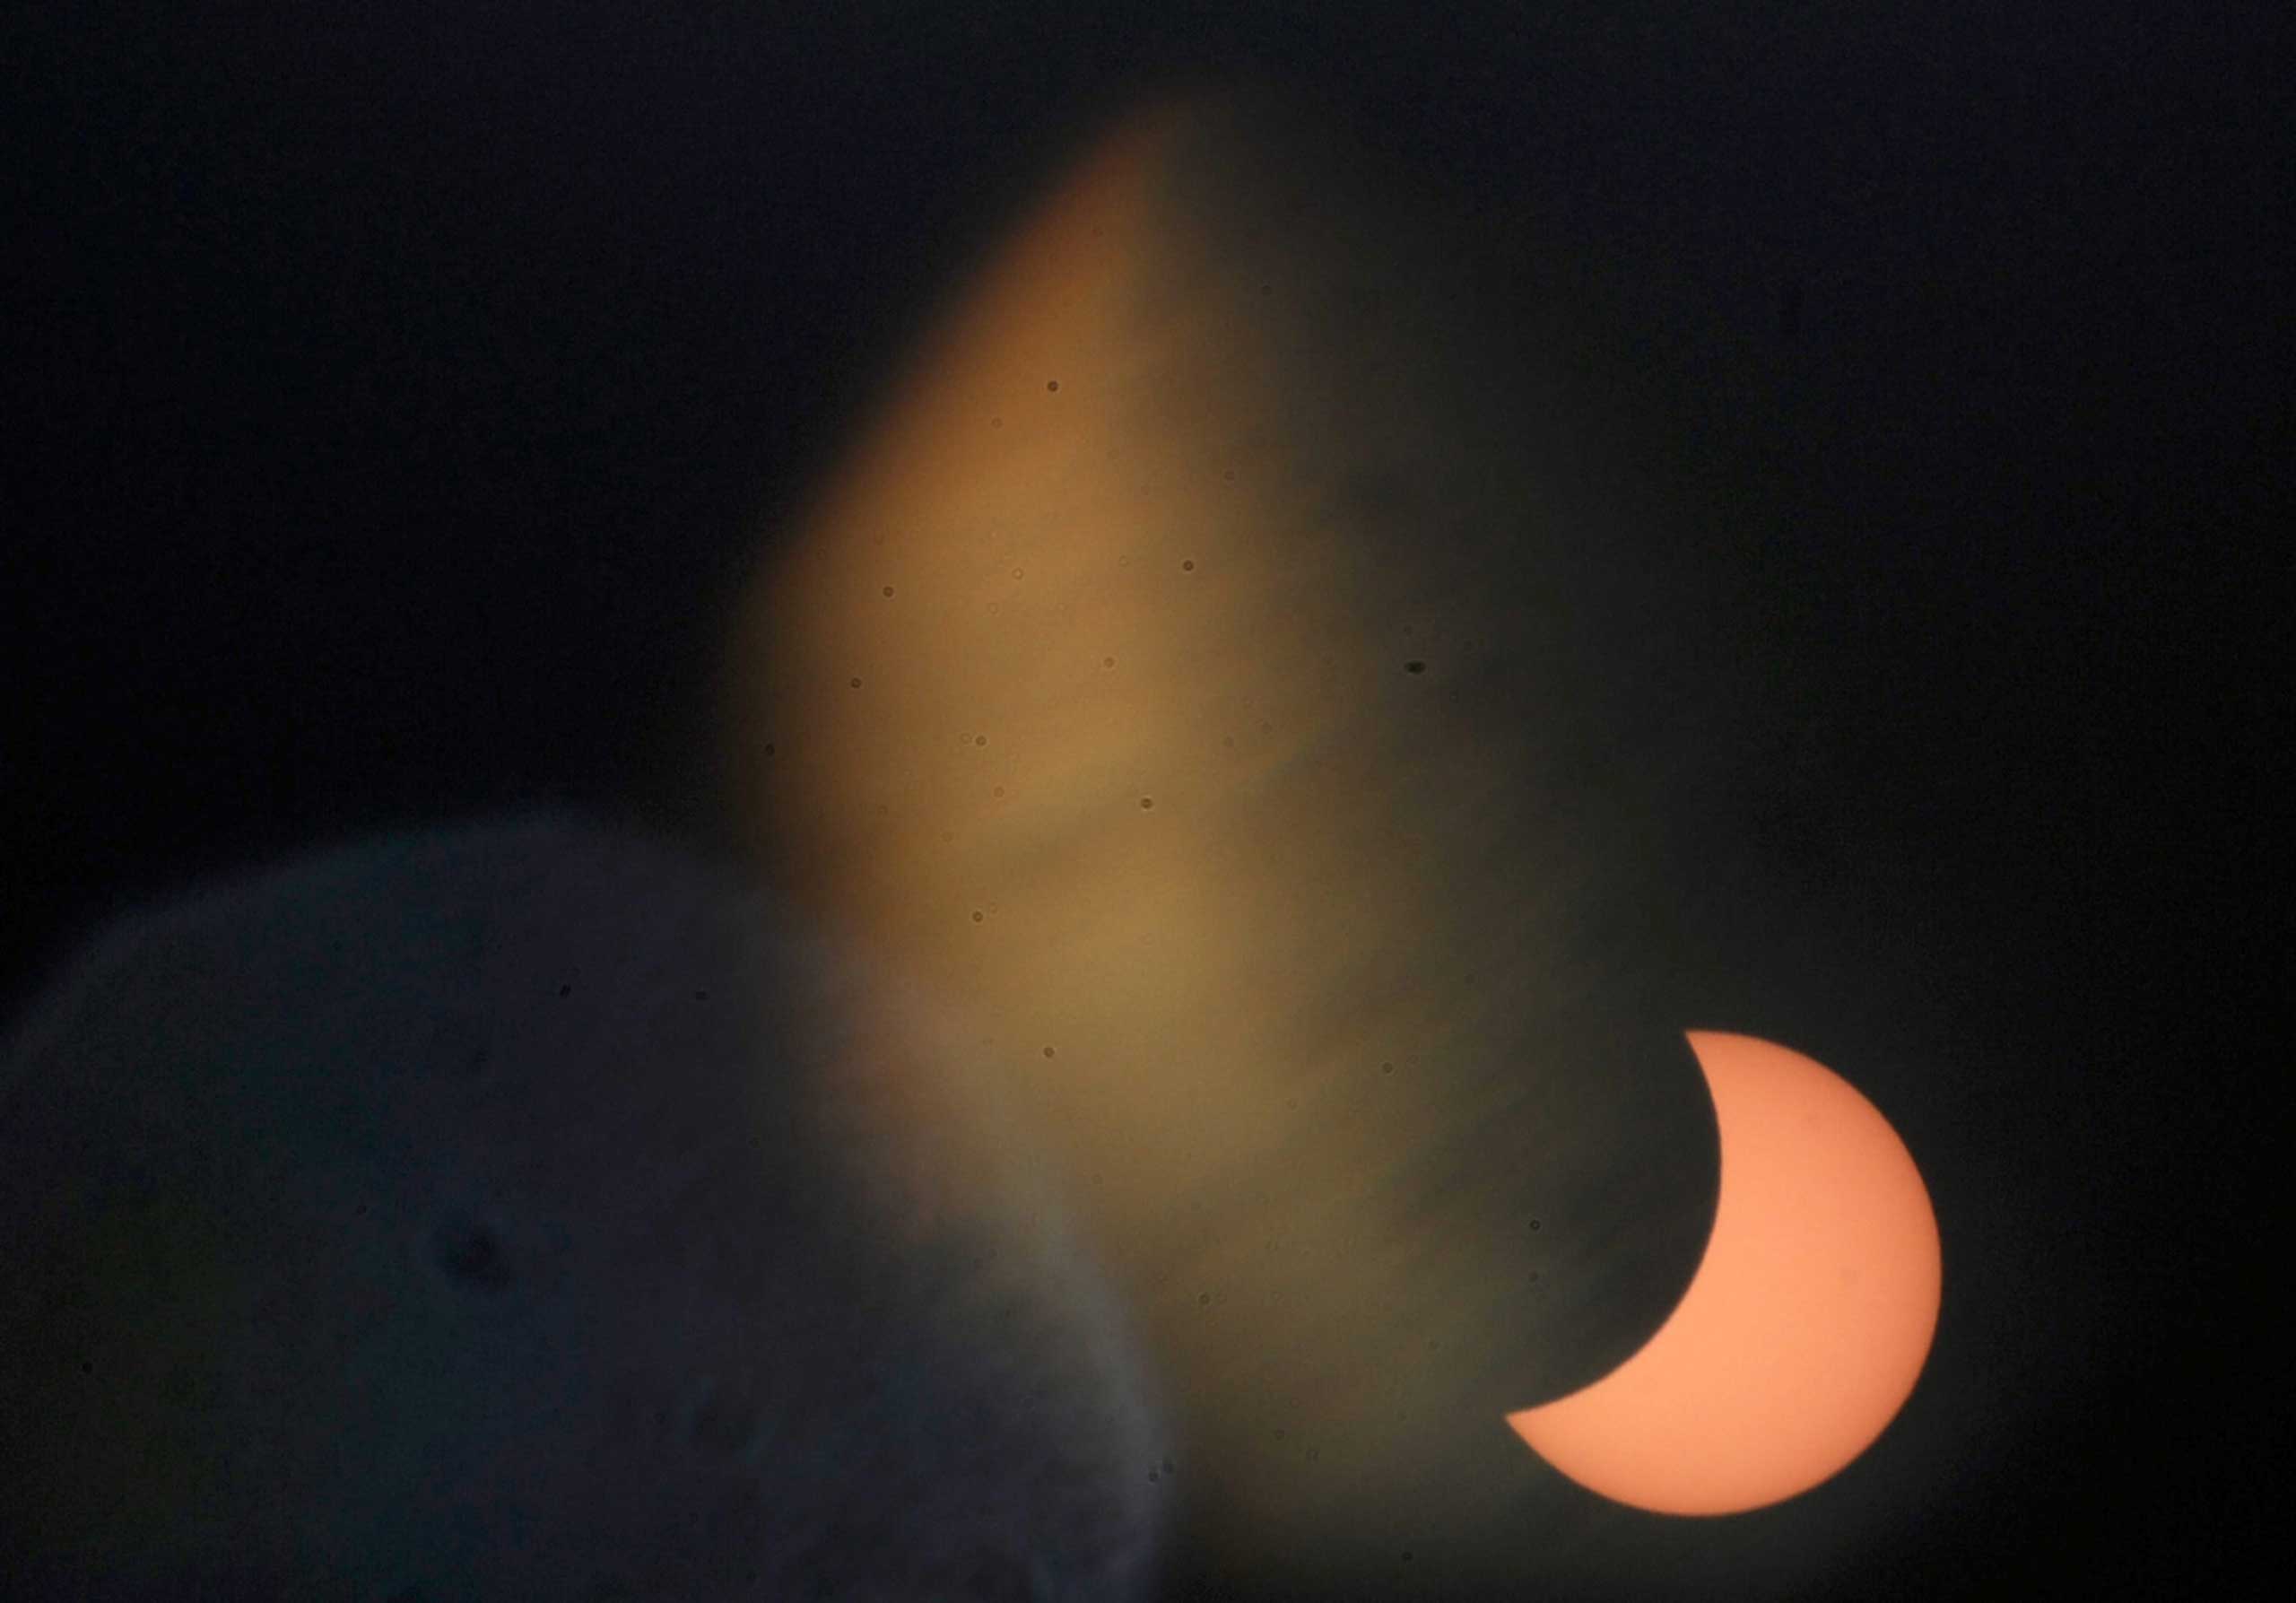 A partial solar eclipse of the sun is visible in Rabat, Morocco on March 20, 2015.